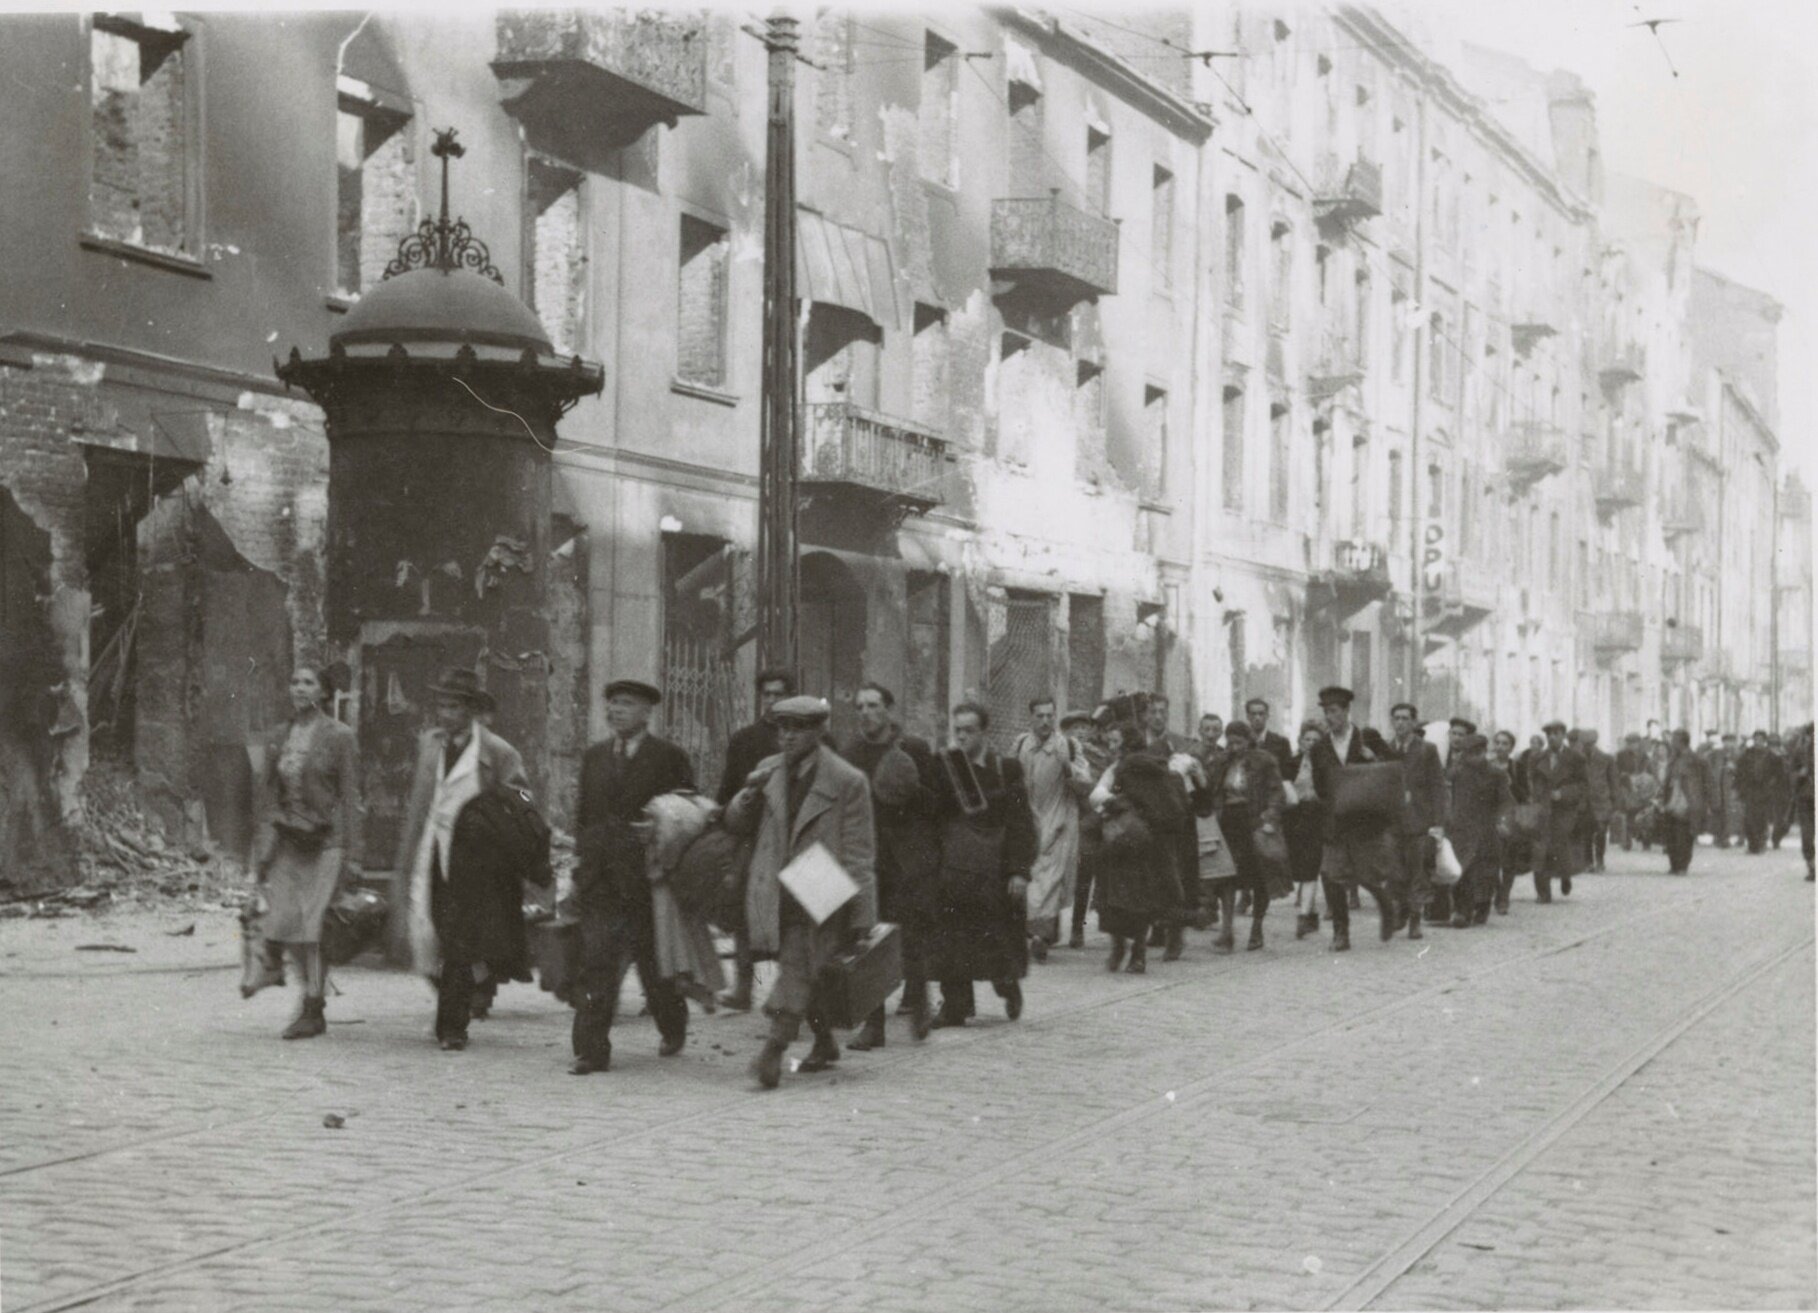 "Captured Jews marched off to the Umschlagplatz for deportation in Zamenhofa Street."